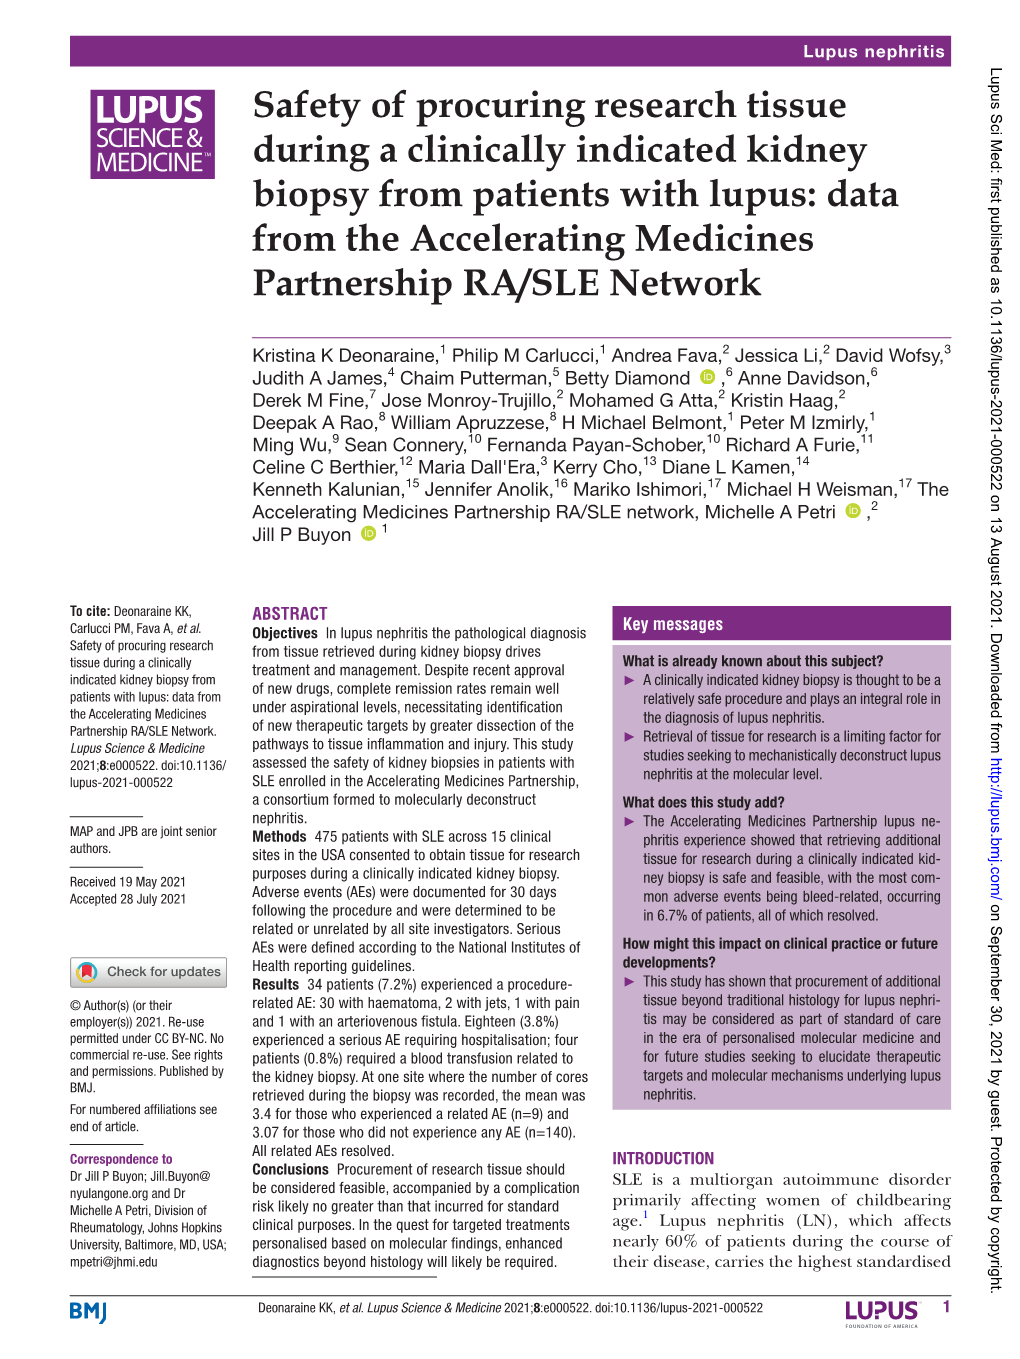 Safety of Procuring Research Tissue During a Clinically Indicated Kidney Biopsy from Patients with Lupus: Data from the Accelera